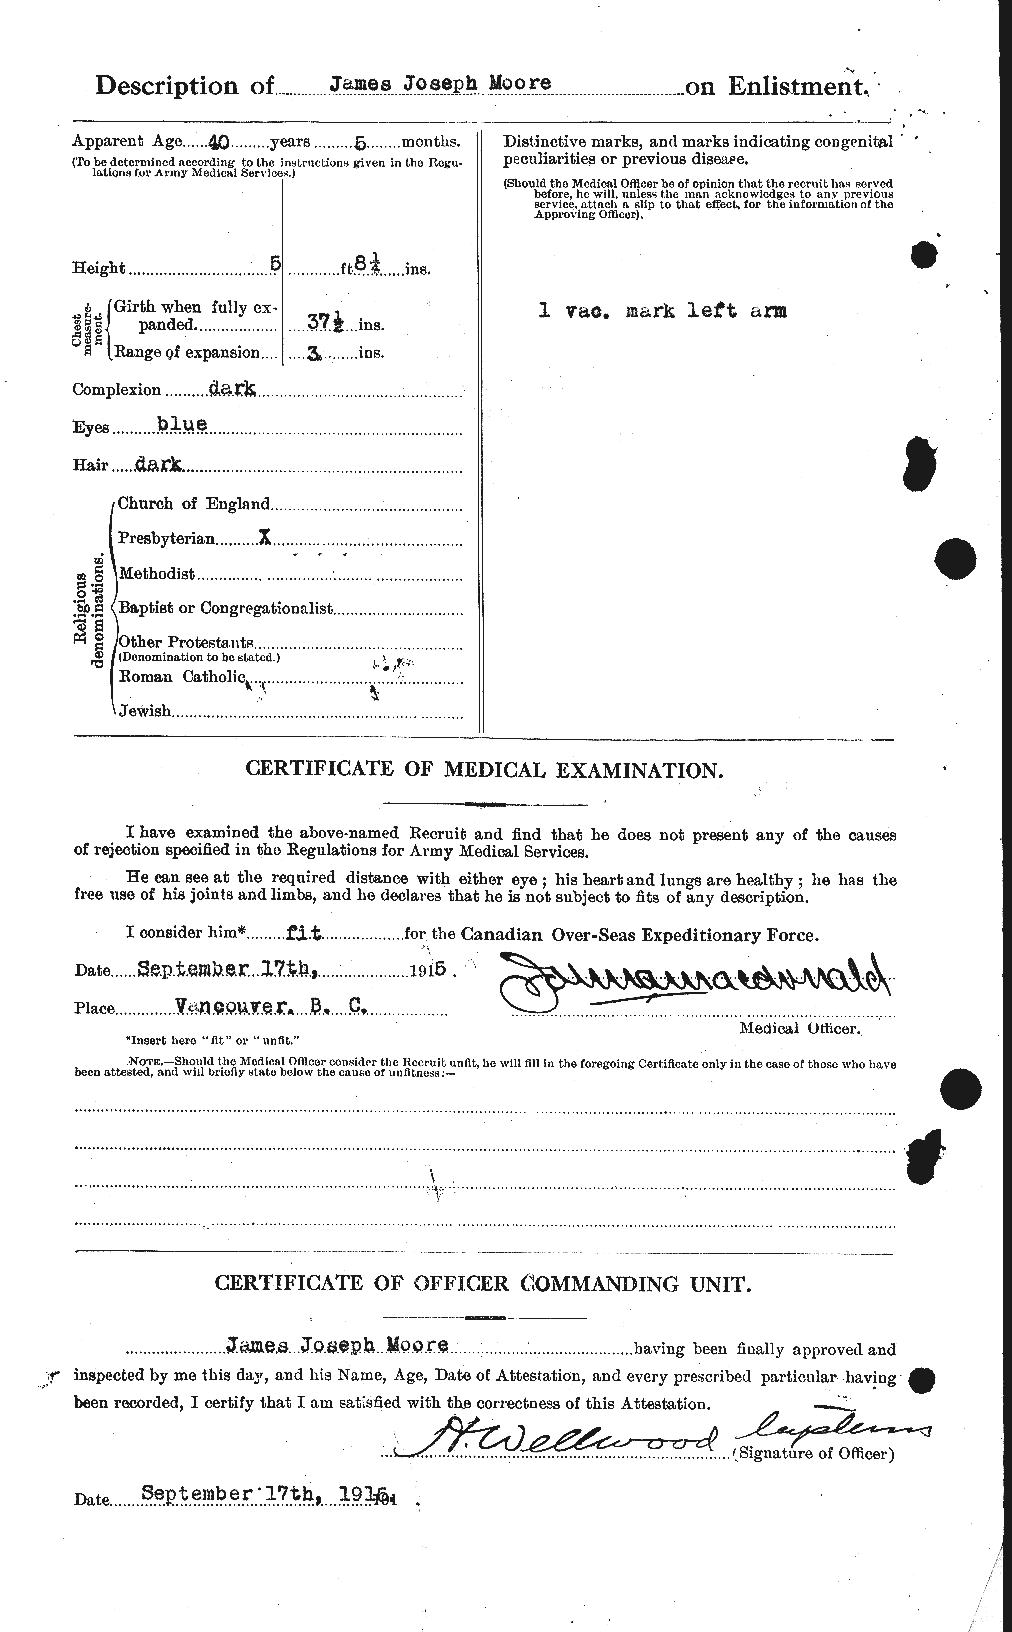 Personnel Records of the First World War - CEF 502228b